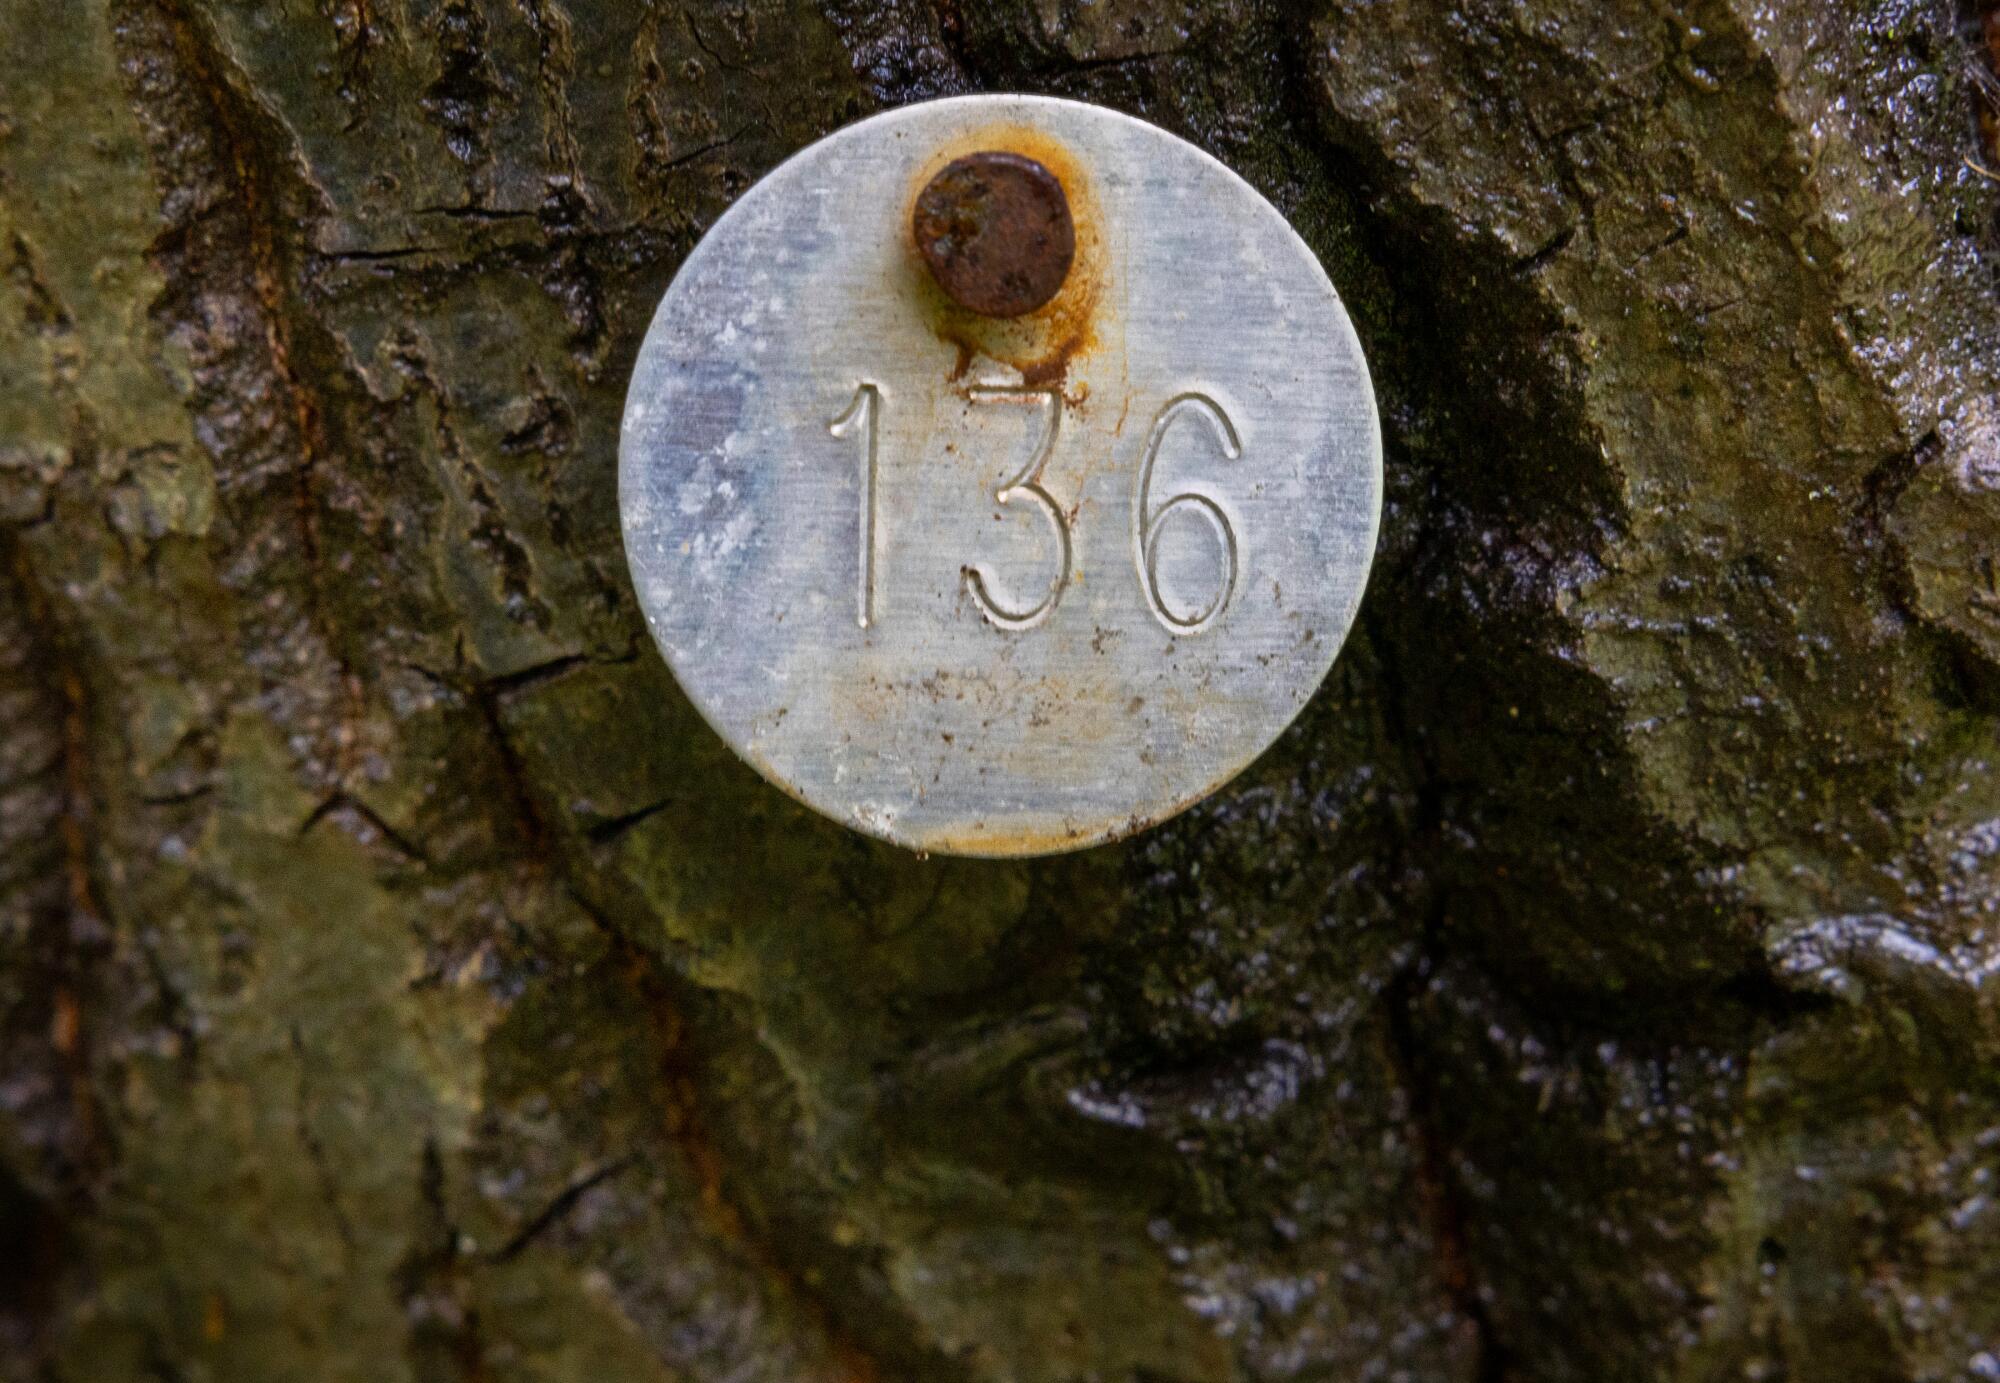 A round metal survey tag with the number 136 attached to a tree